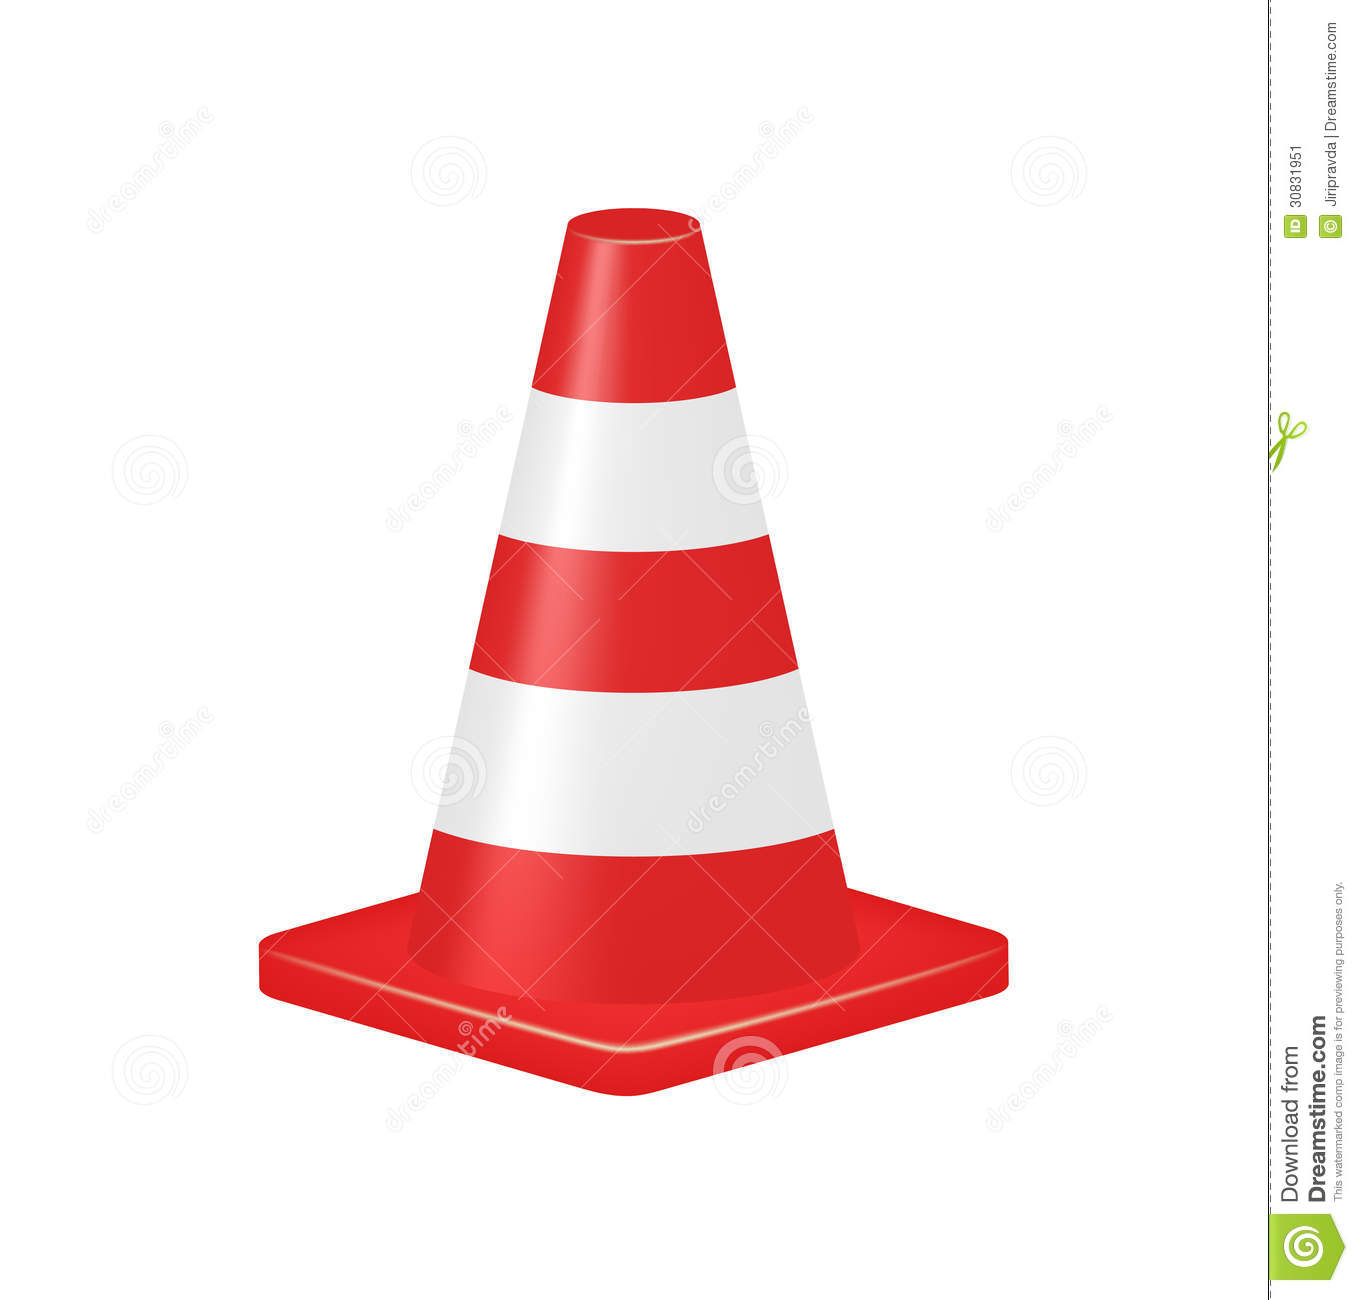 Red Traffic Cone Stock Image   Image  30831951